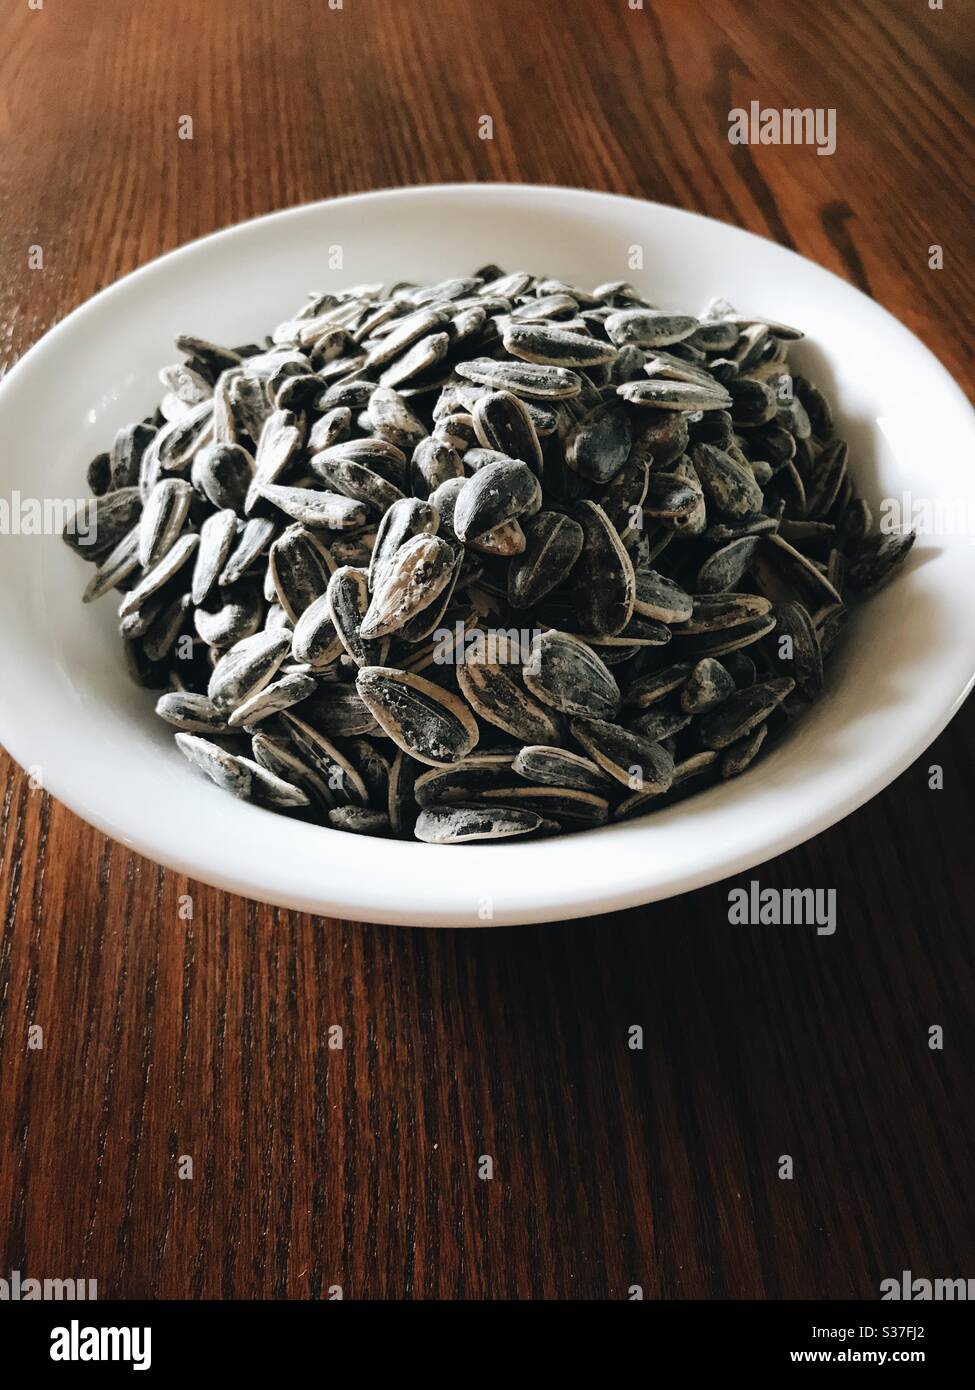 Bowl of Sunflower seeds Stock Photo